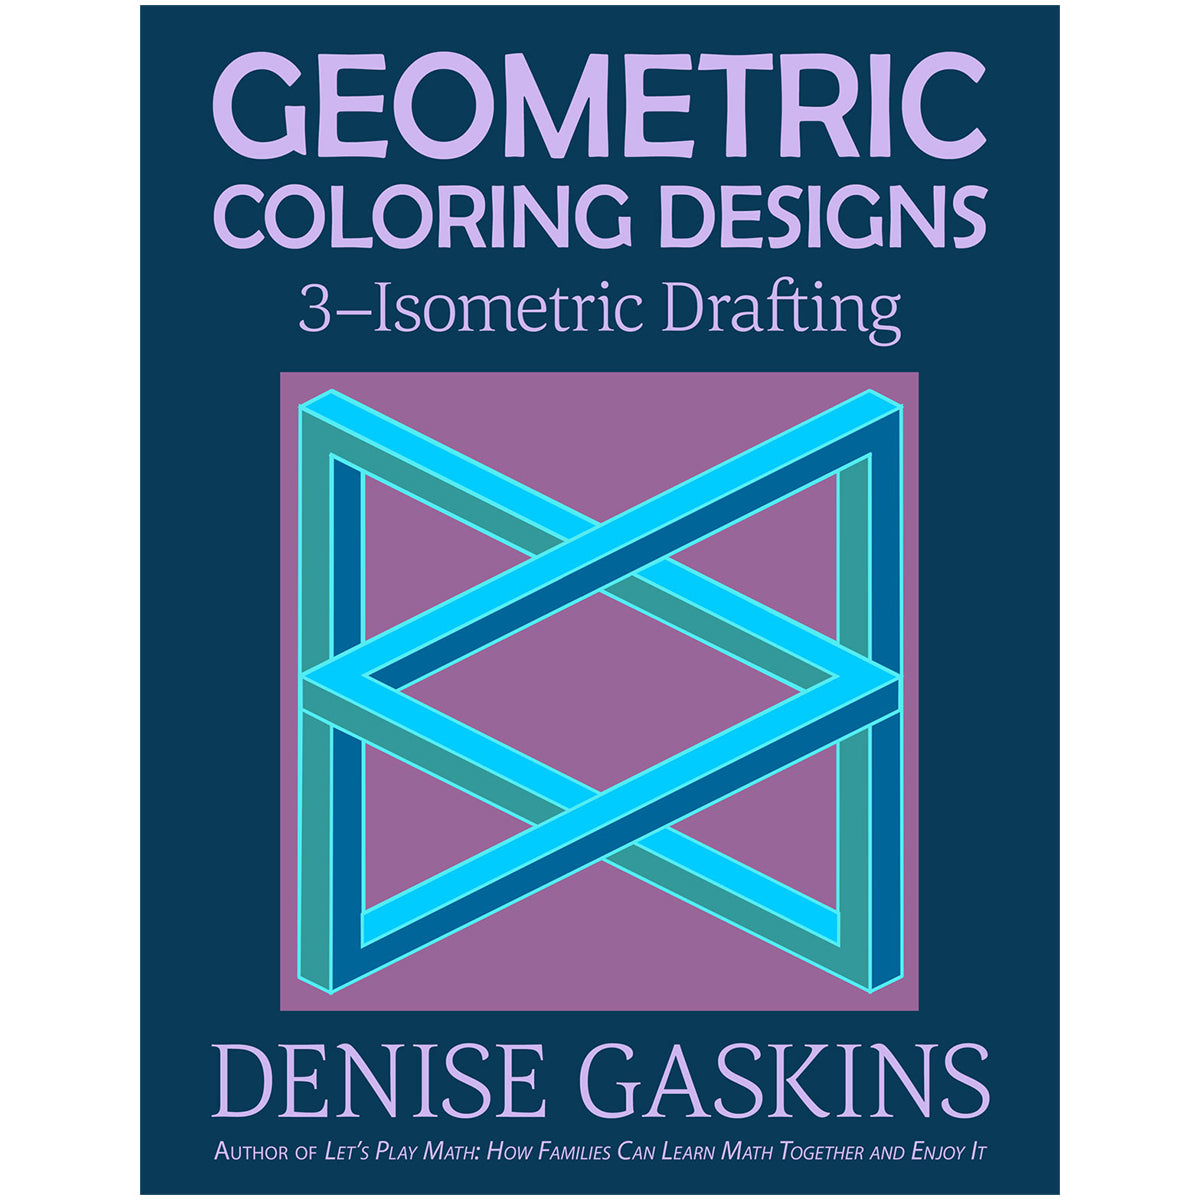 Isometric Drafting geometric coloring designs math art printable activity book by Denise Gaskins